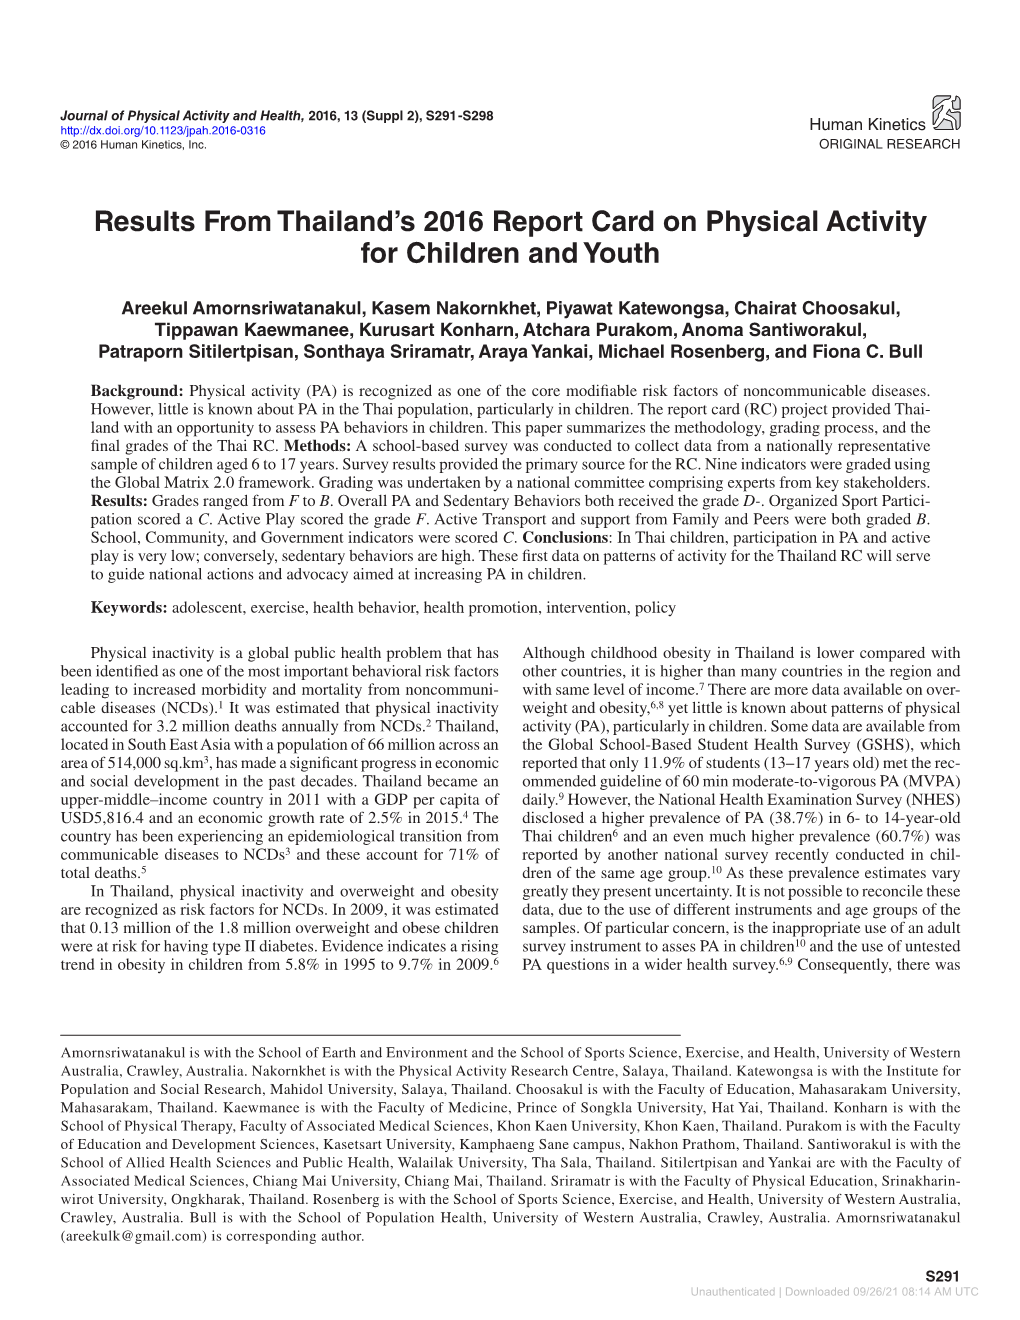 Results from Thailand's 2016 Report Card on Physical Activity For